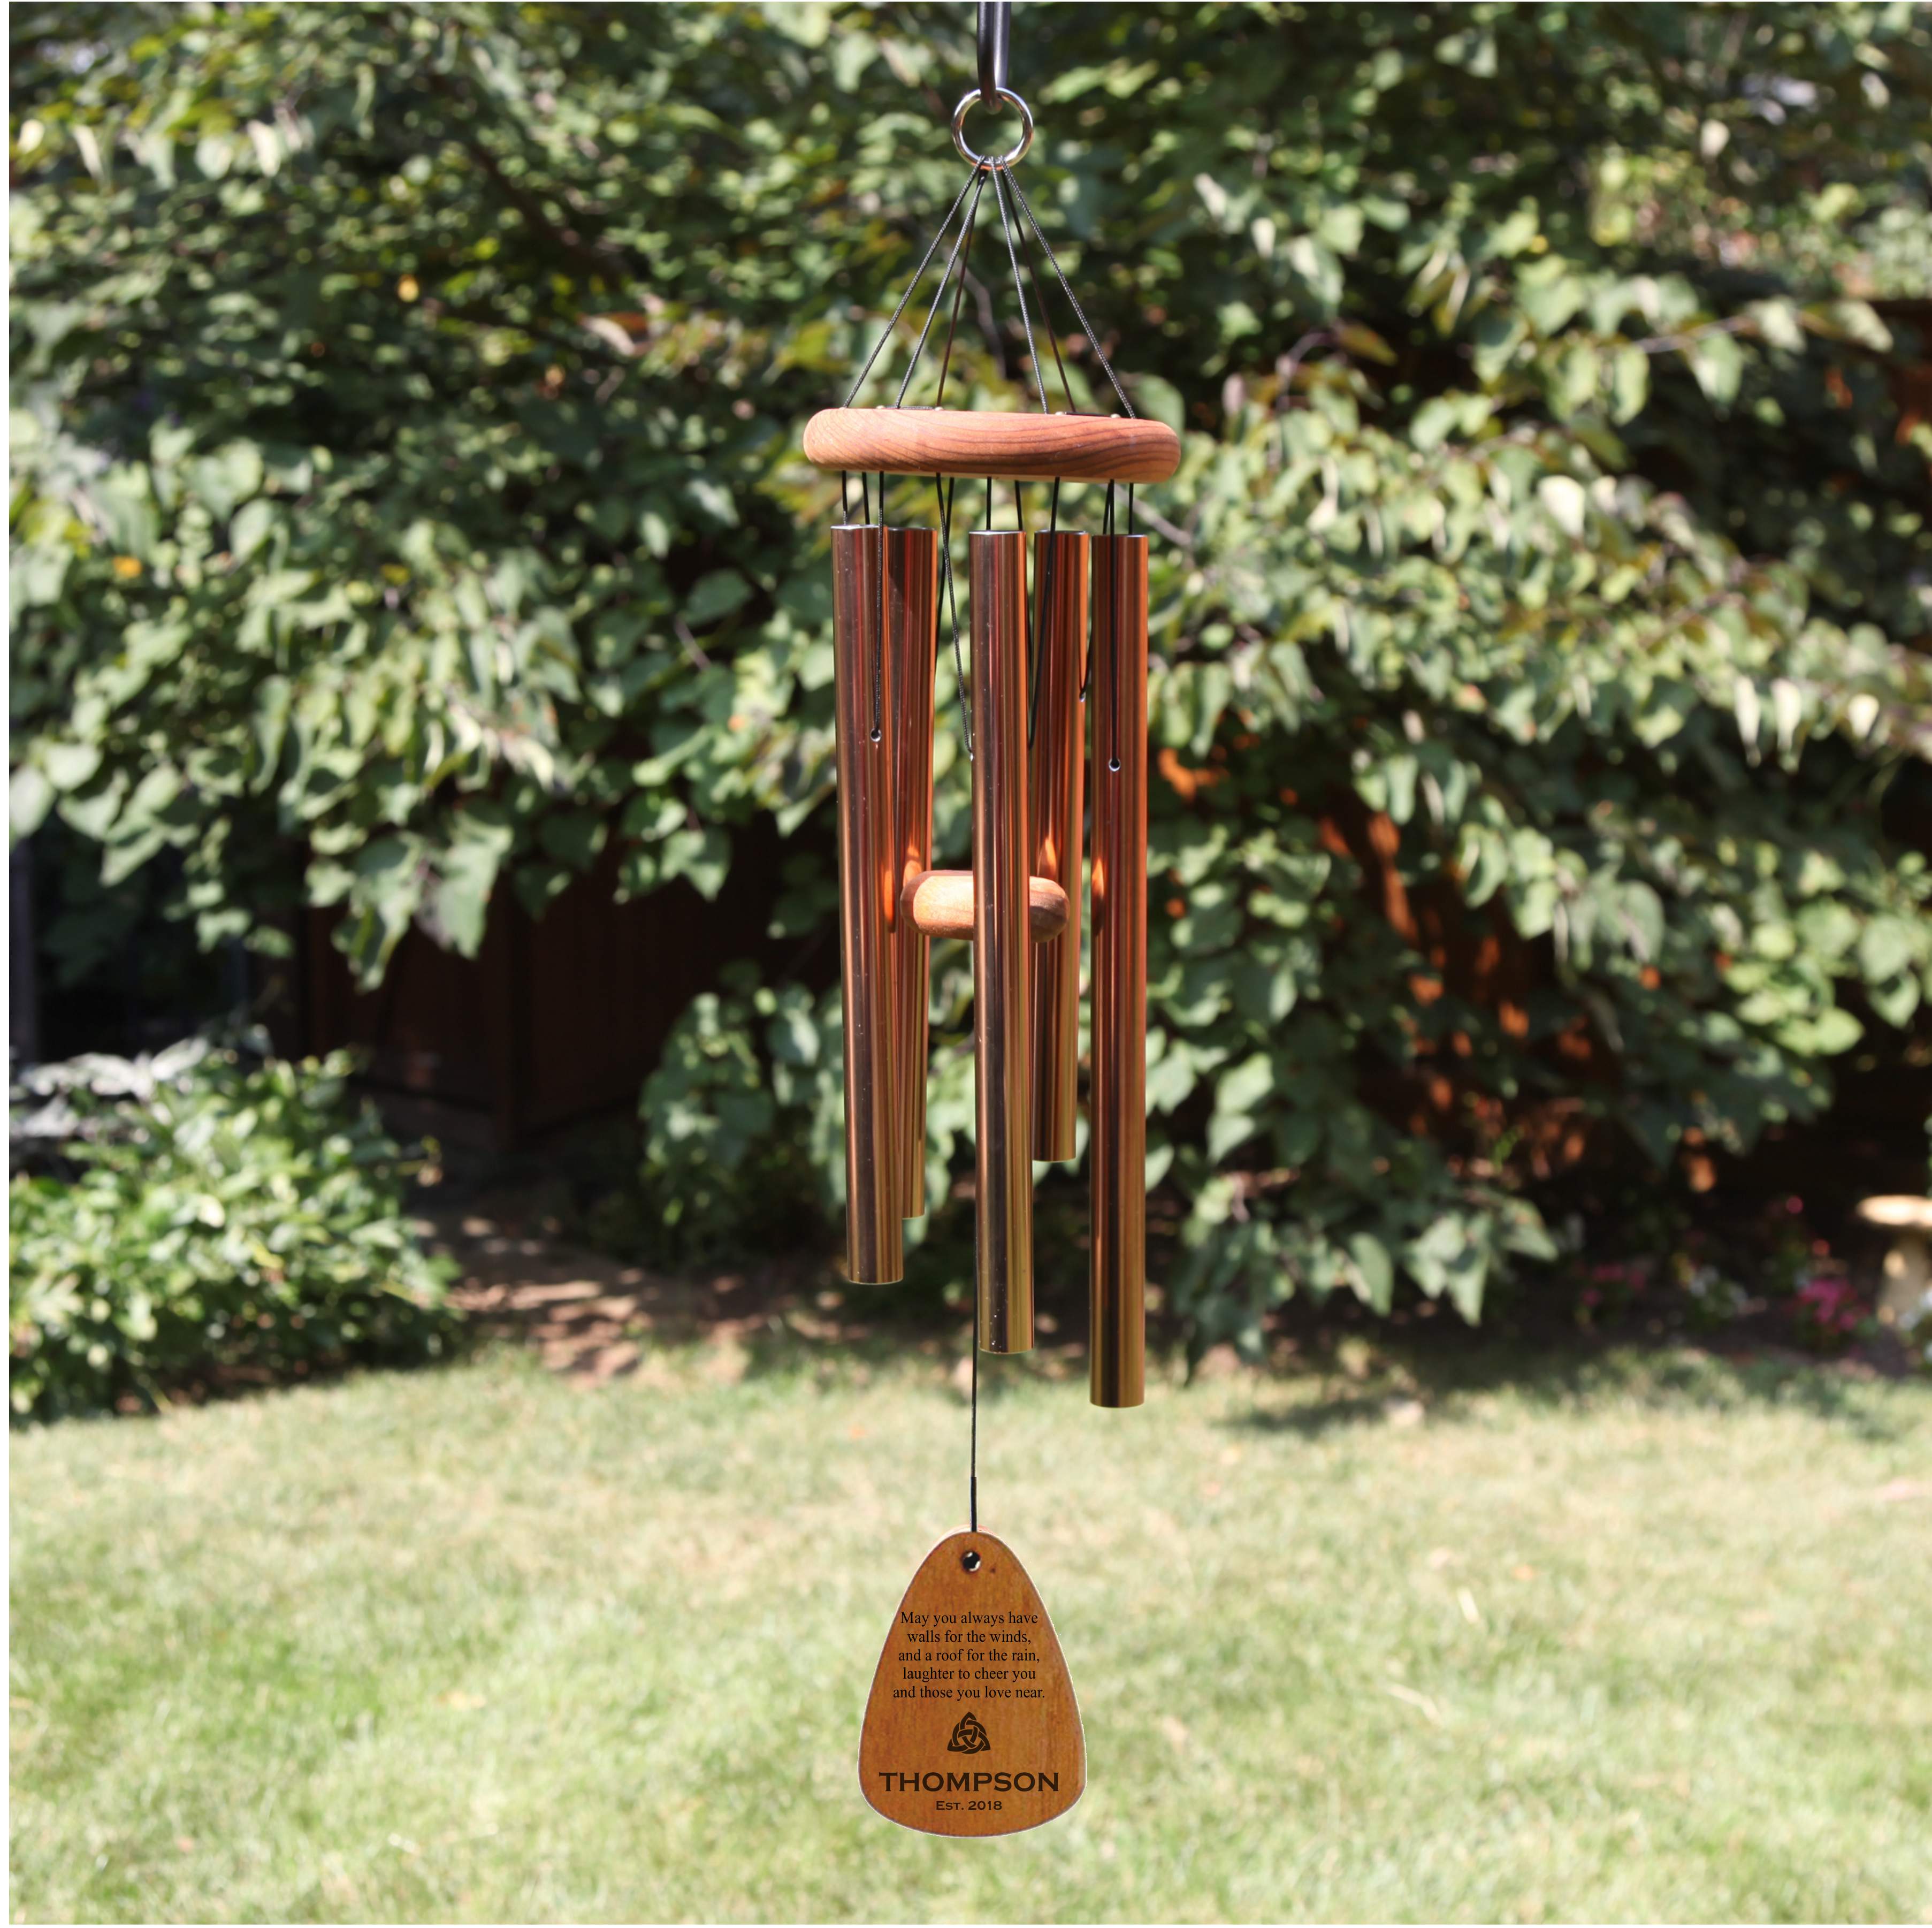 Irish Blessing Personalized Wind Chime